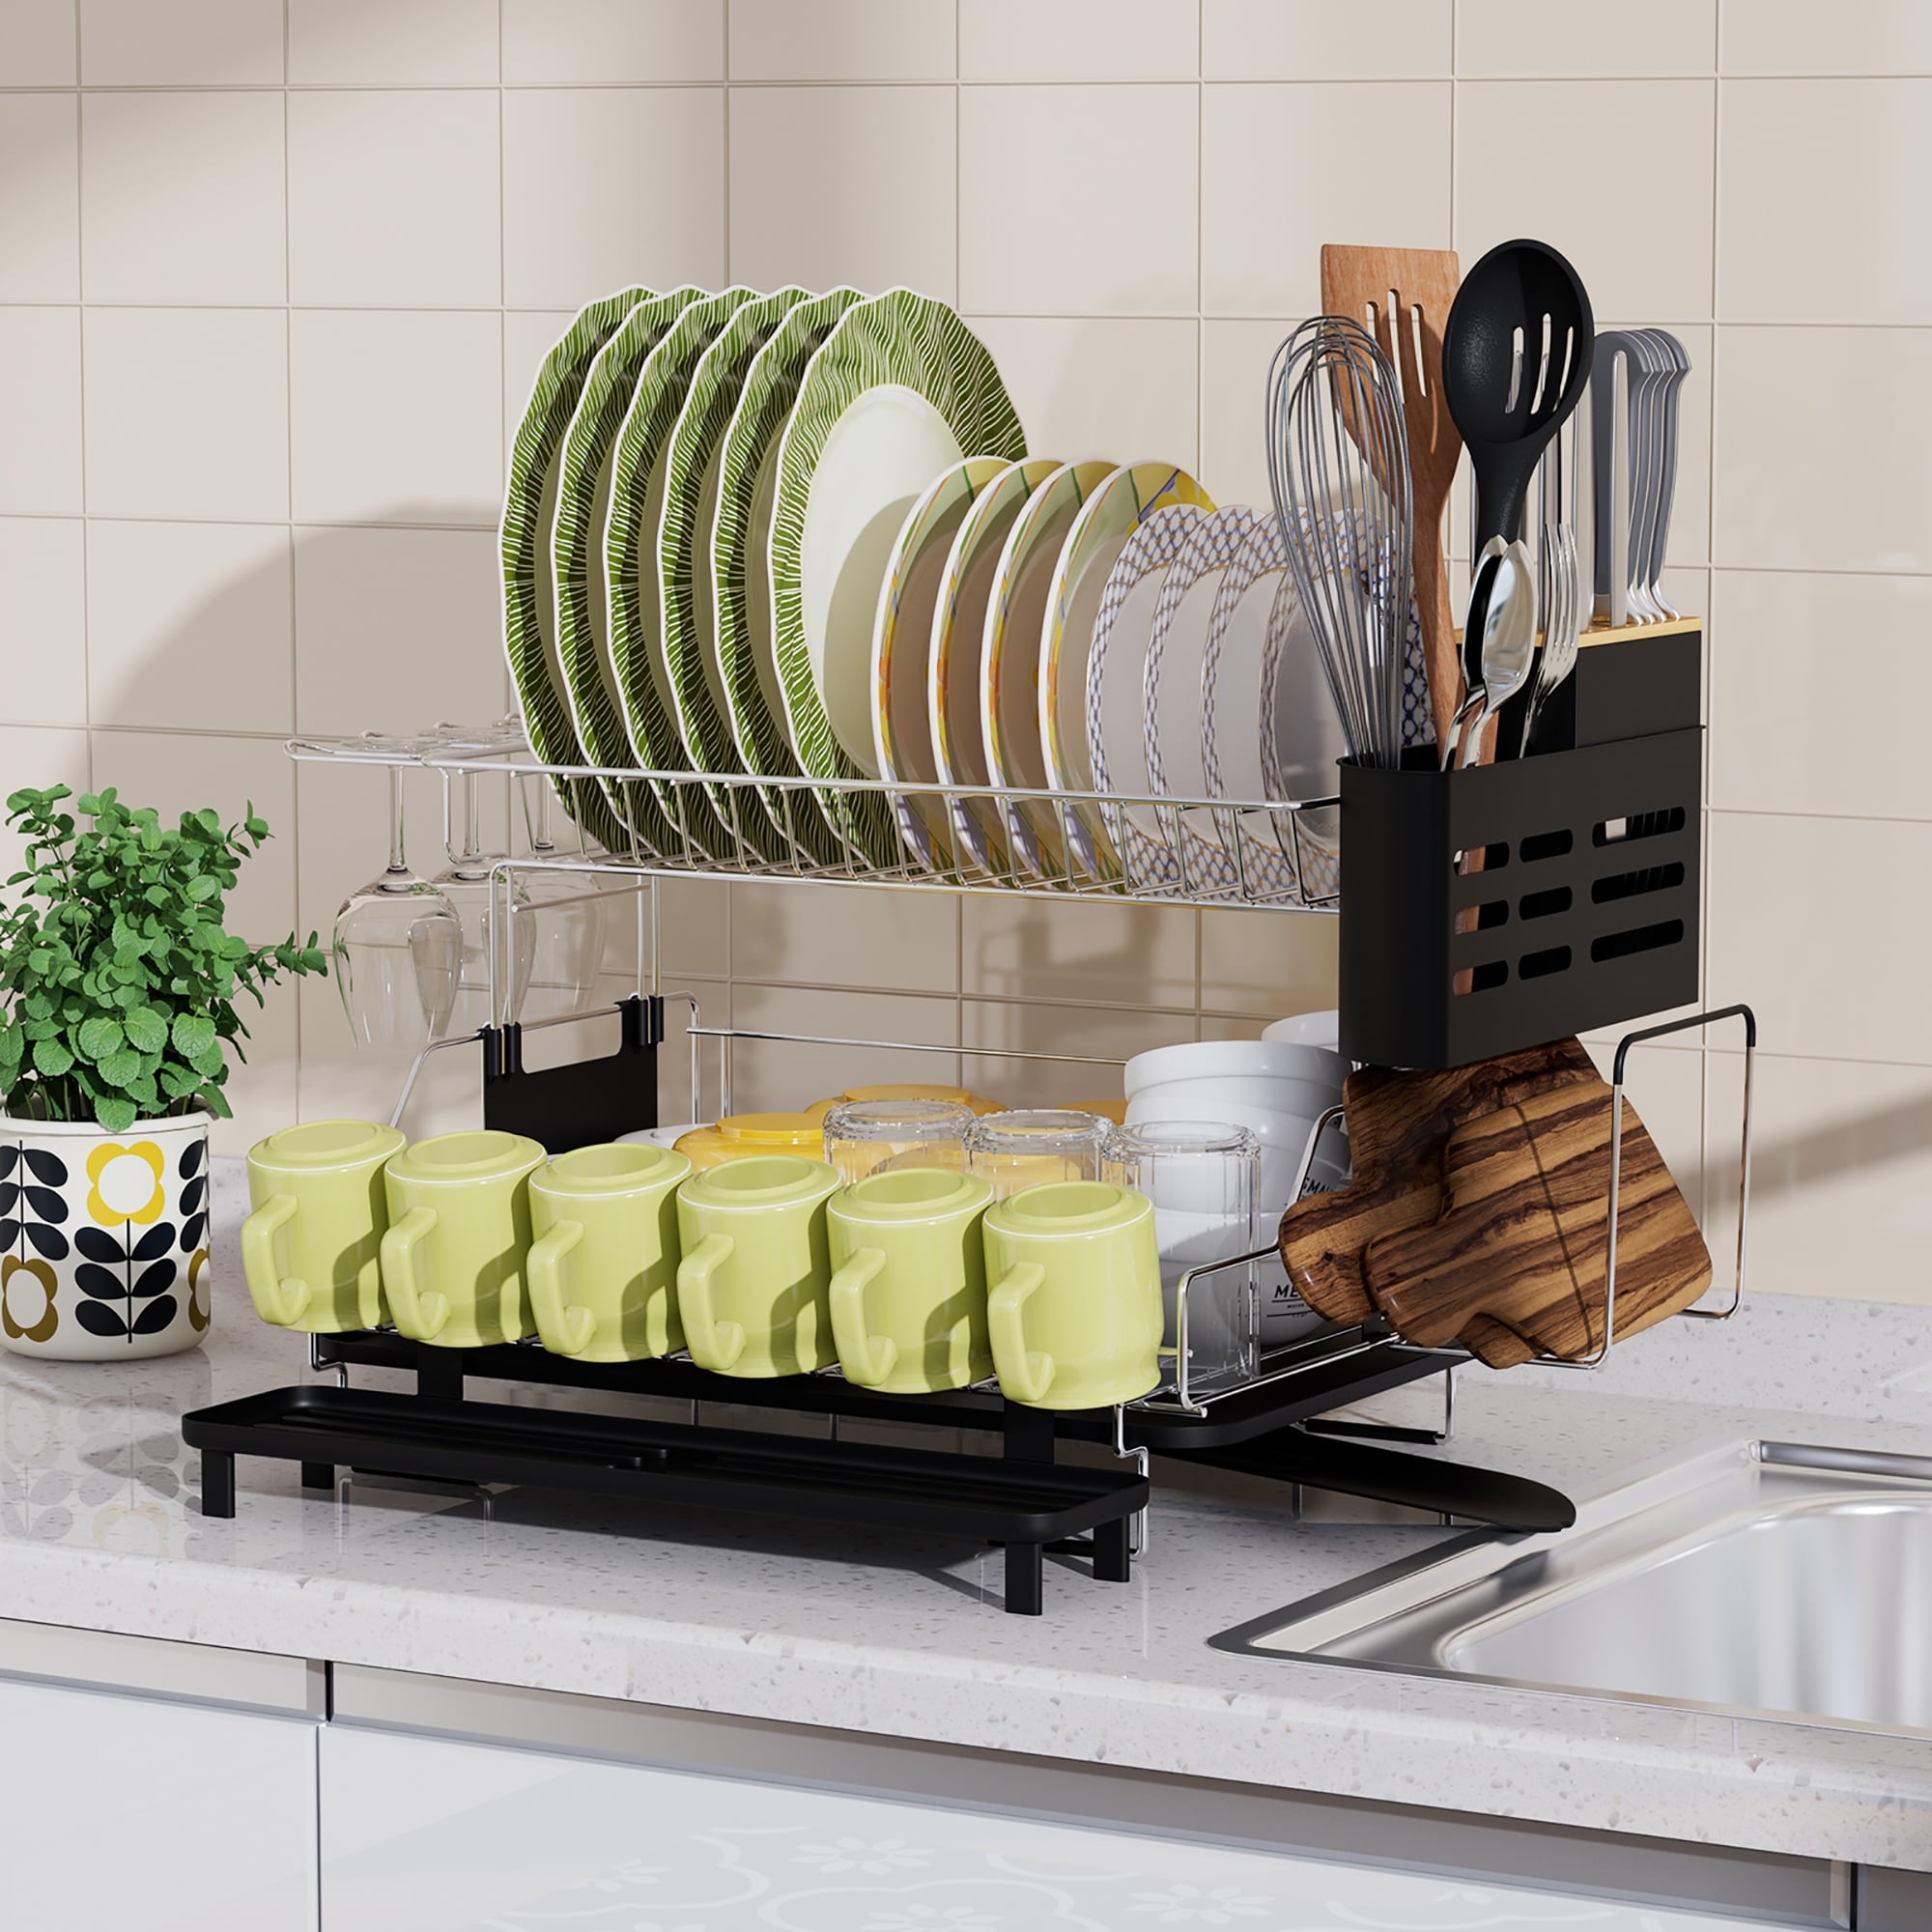 https://ak1.ostkcdn.com/images/products/is/images/direct/a864bc522ac315de4d4a3089e7eea87c446540aa/Dish-Drying-Rack-Detachable-2-Tier-Dish-Rack-with-Drainboard.jpg